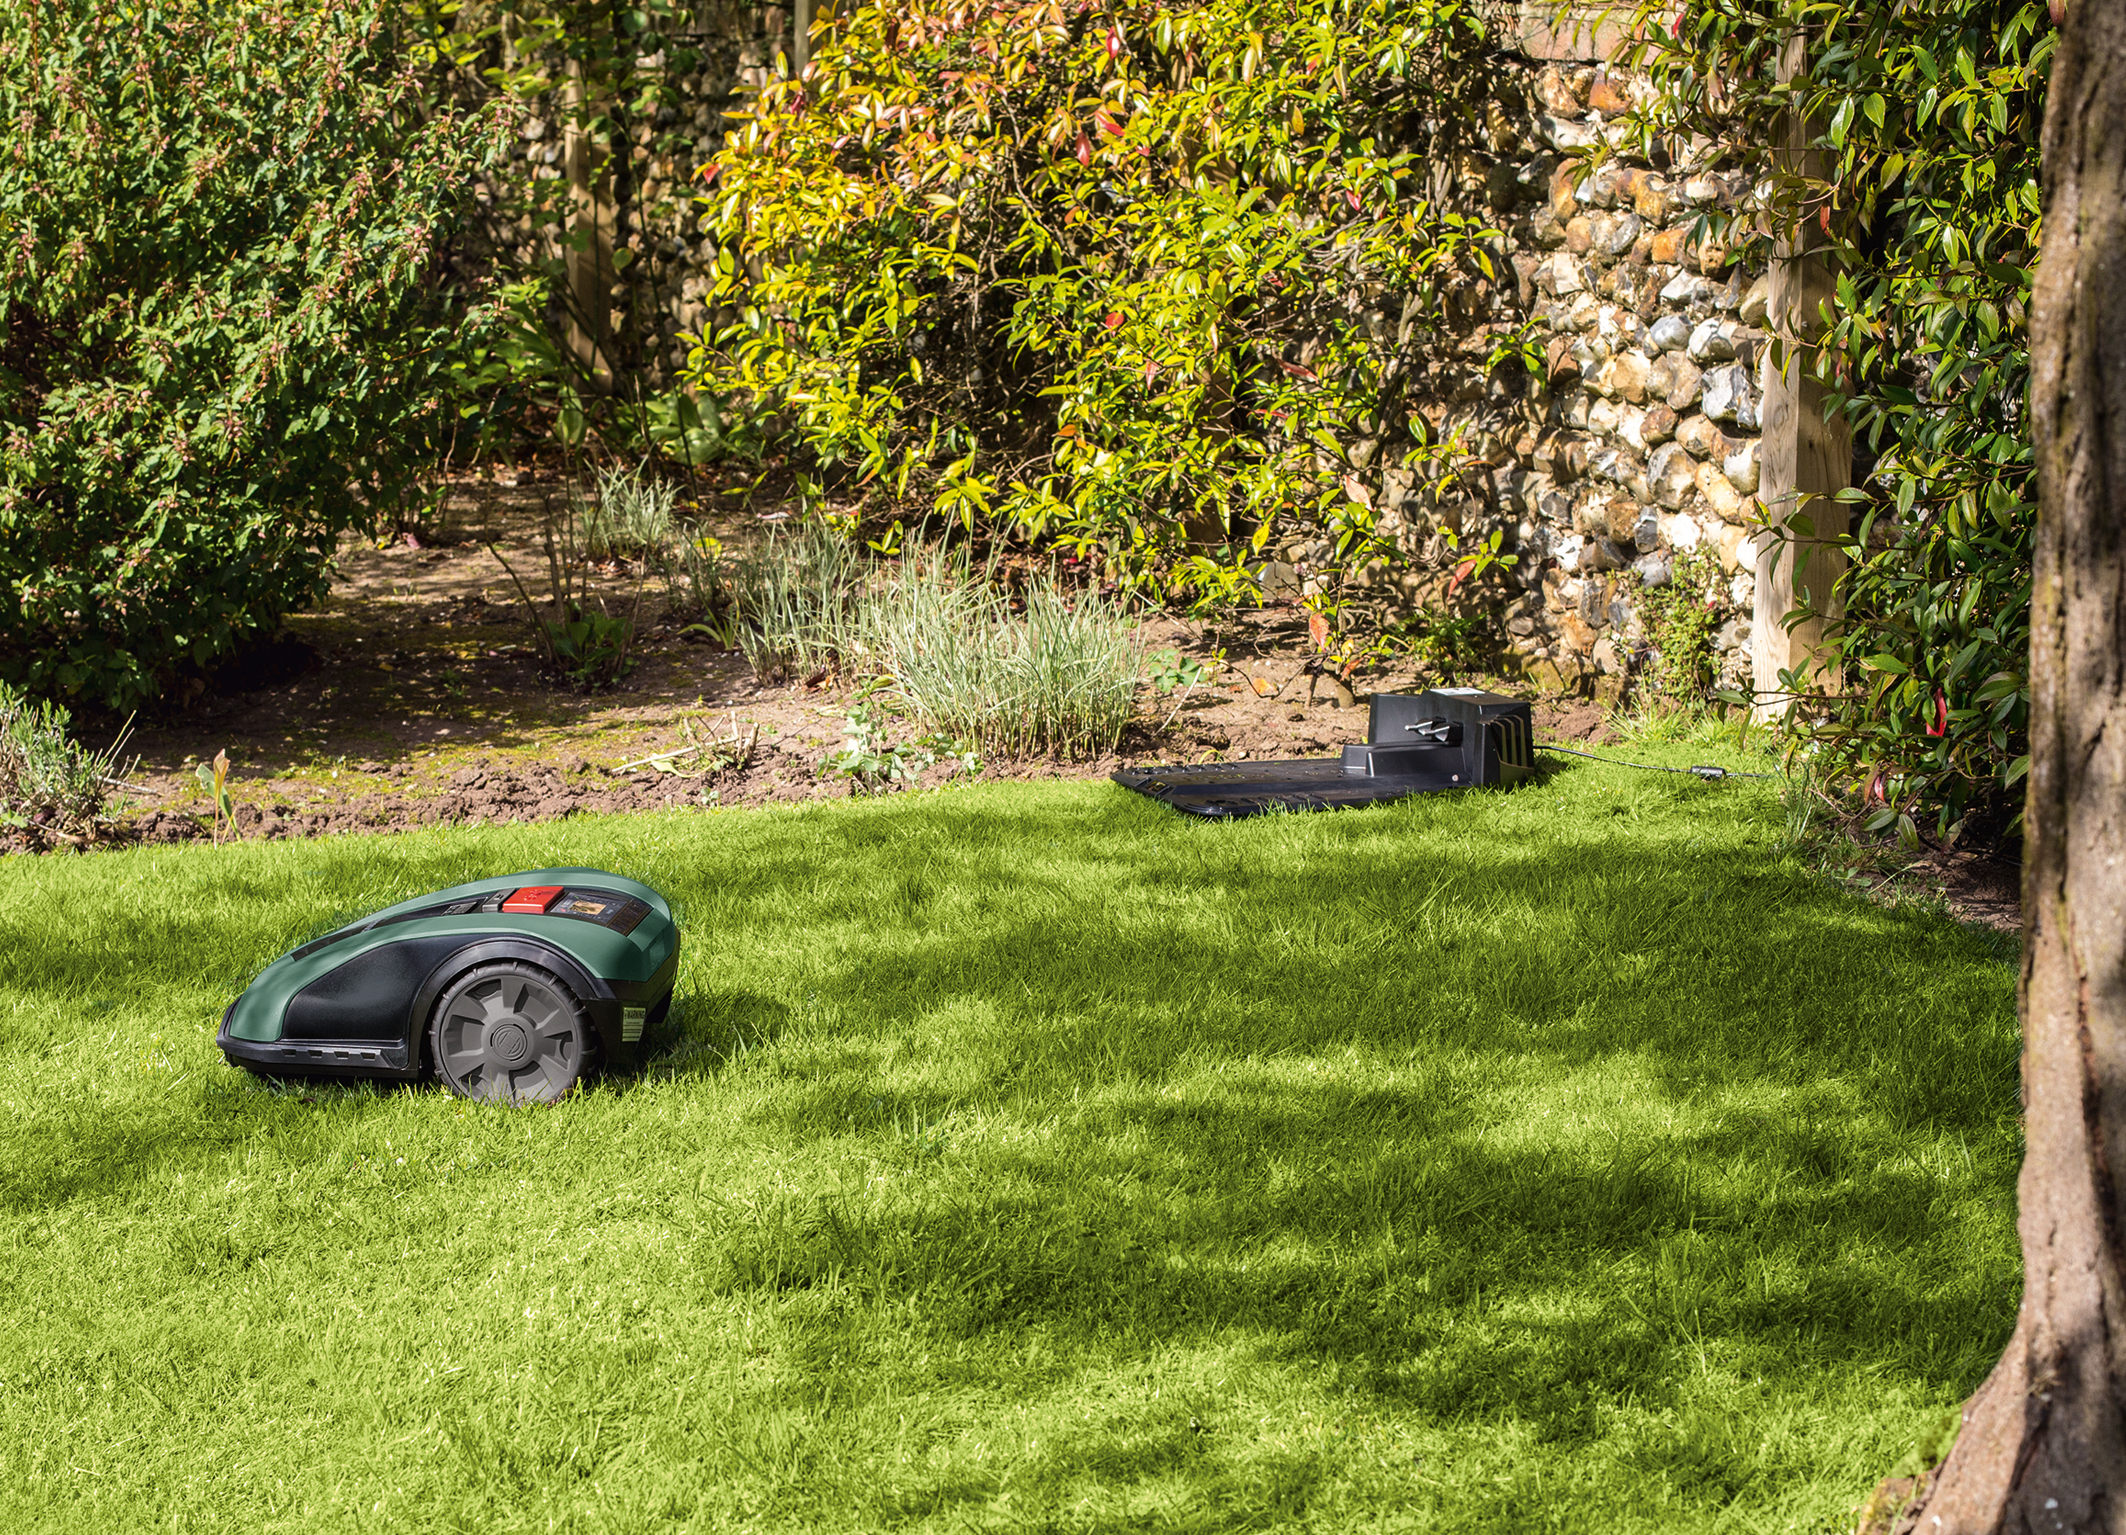 High added value thanks to exact measurement of the lawn area: Bosch robotic lawnmowers Indego M 700 and Indego M+ 700